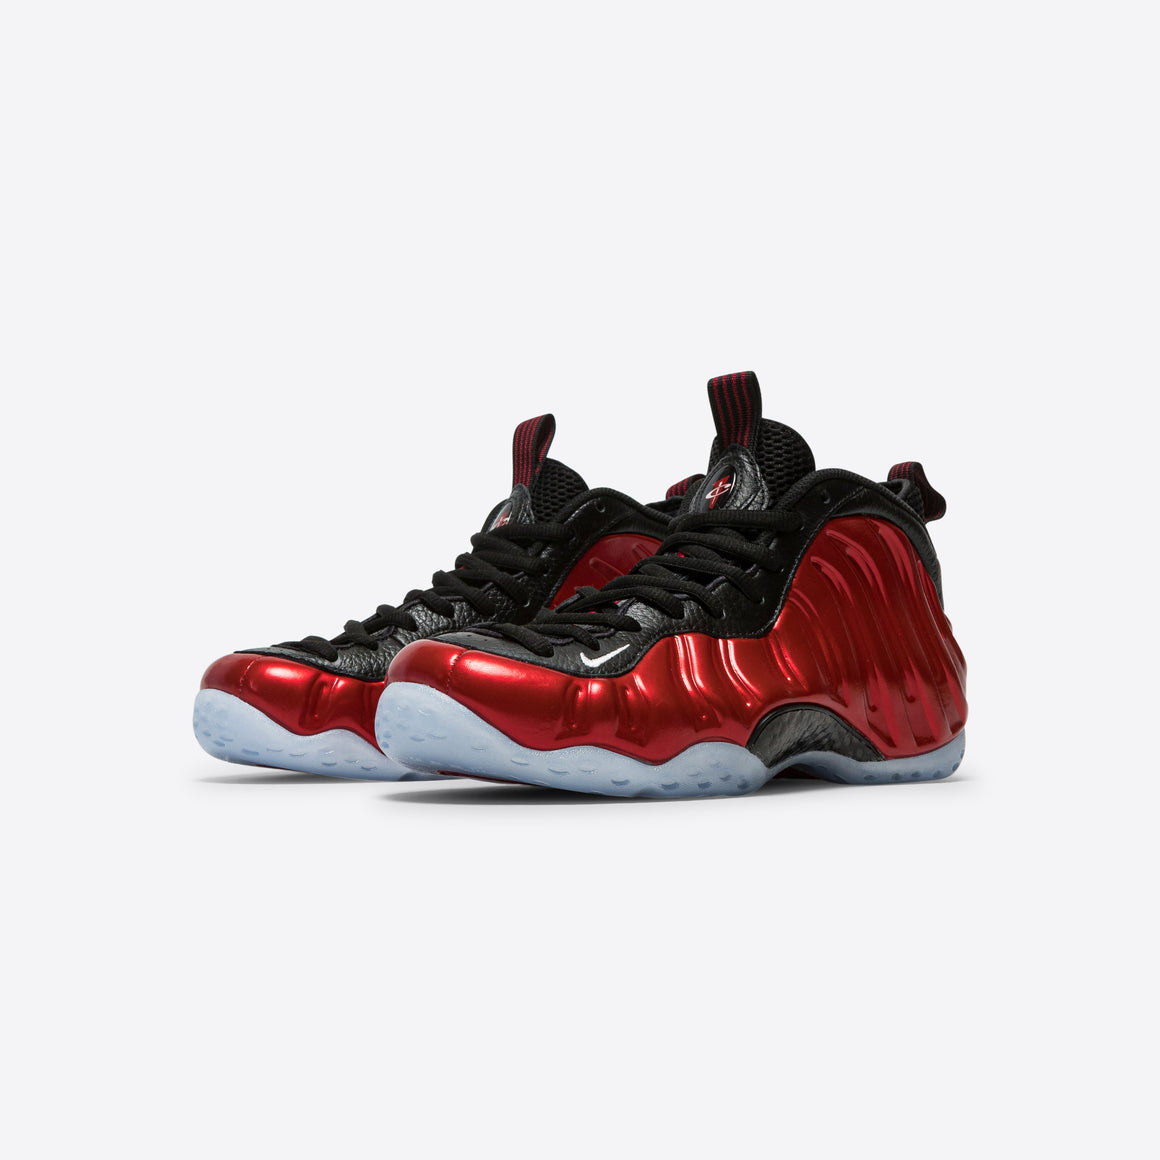 Nike - Air Foamposite One - Varsity Red/White-Black - UP THERE